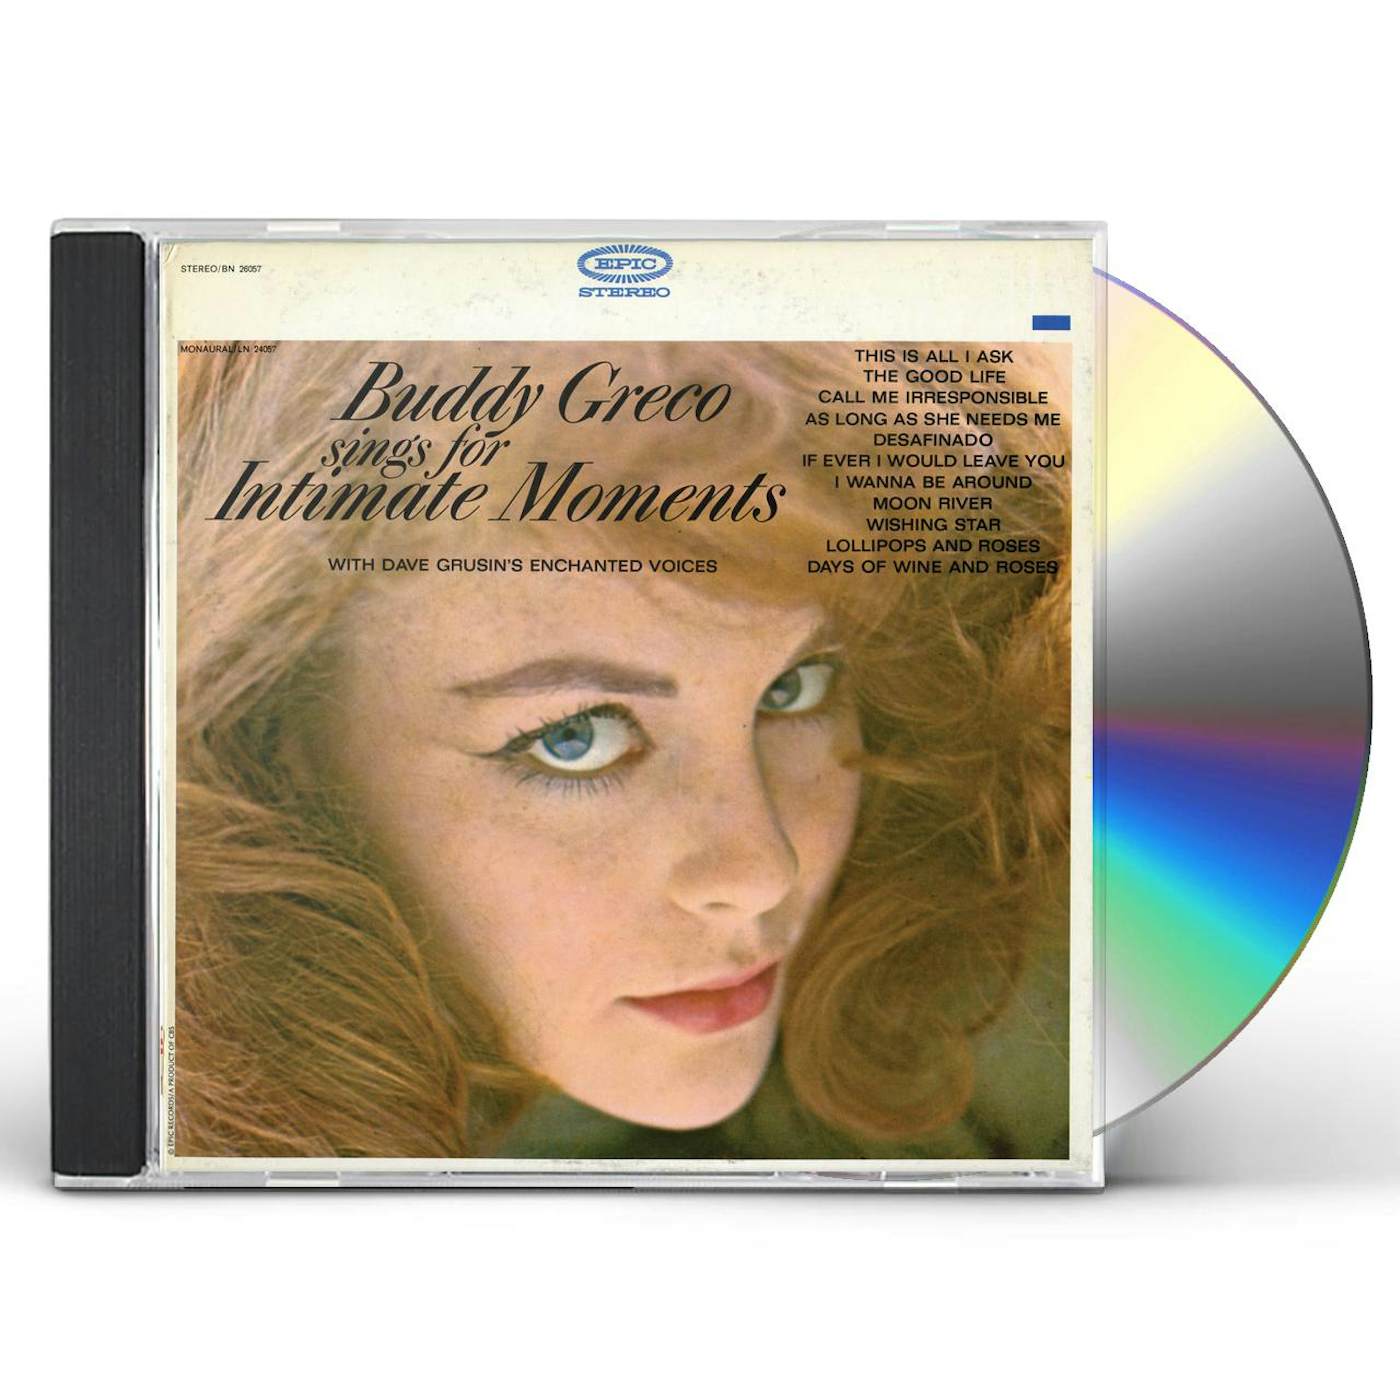 Buddy Greco SINGS FOR INTIMATE MOMENTS CD